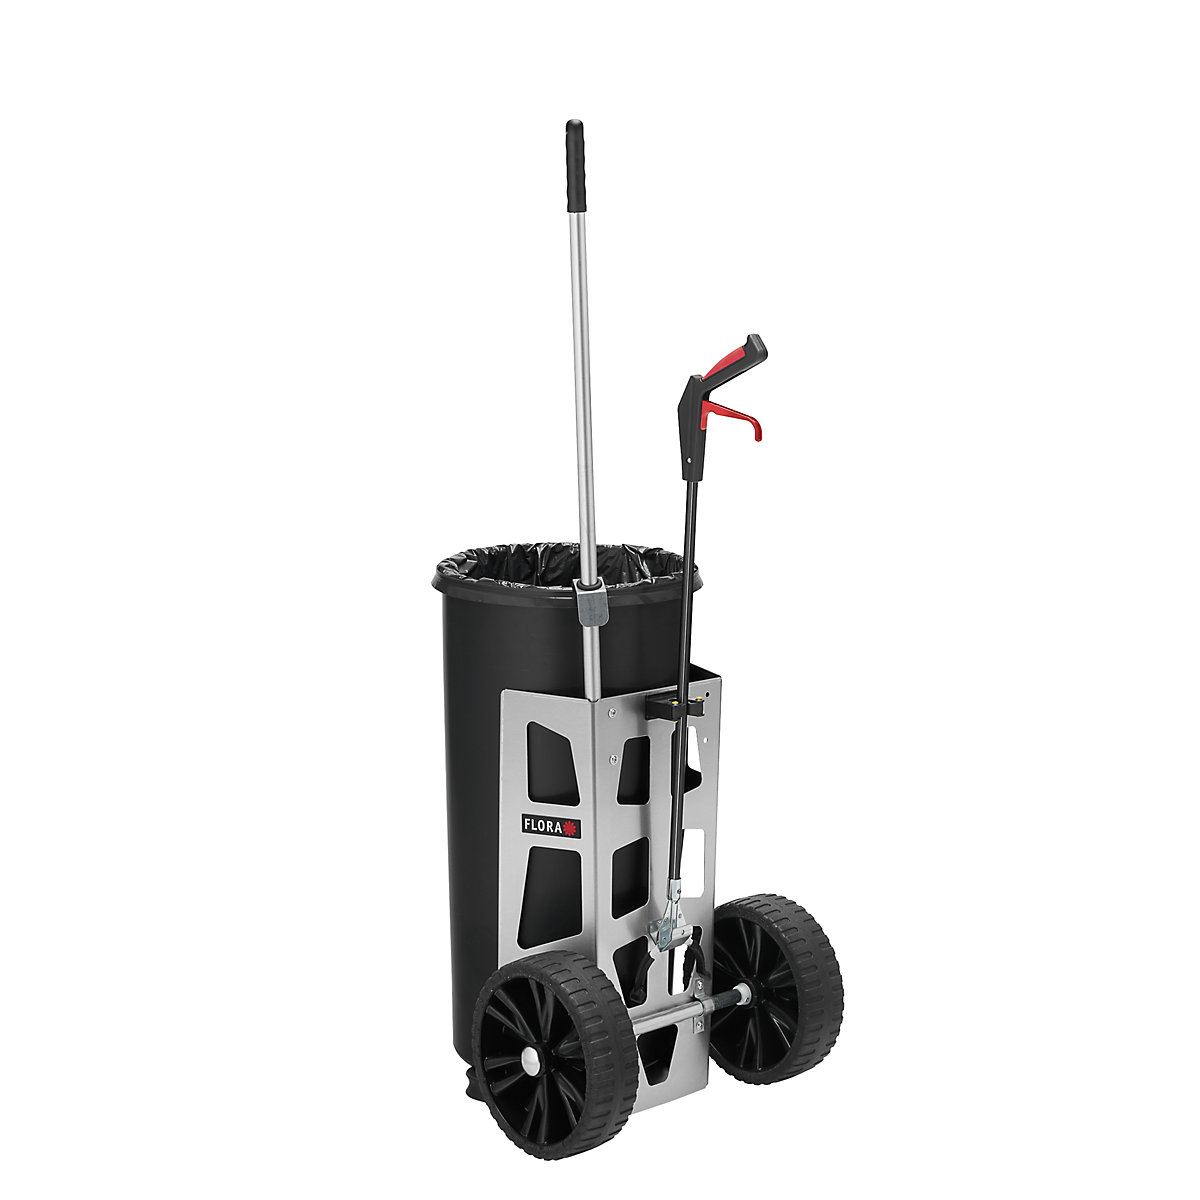 EASY UNO waste collection trolley – FLORA